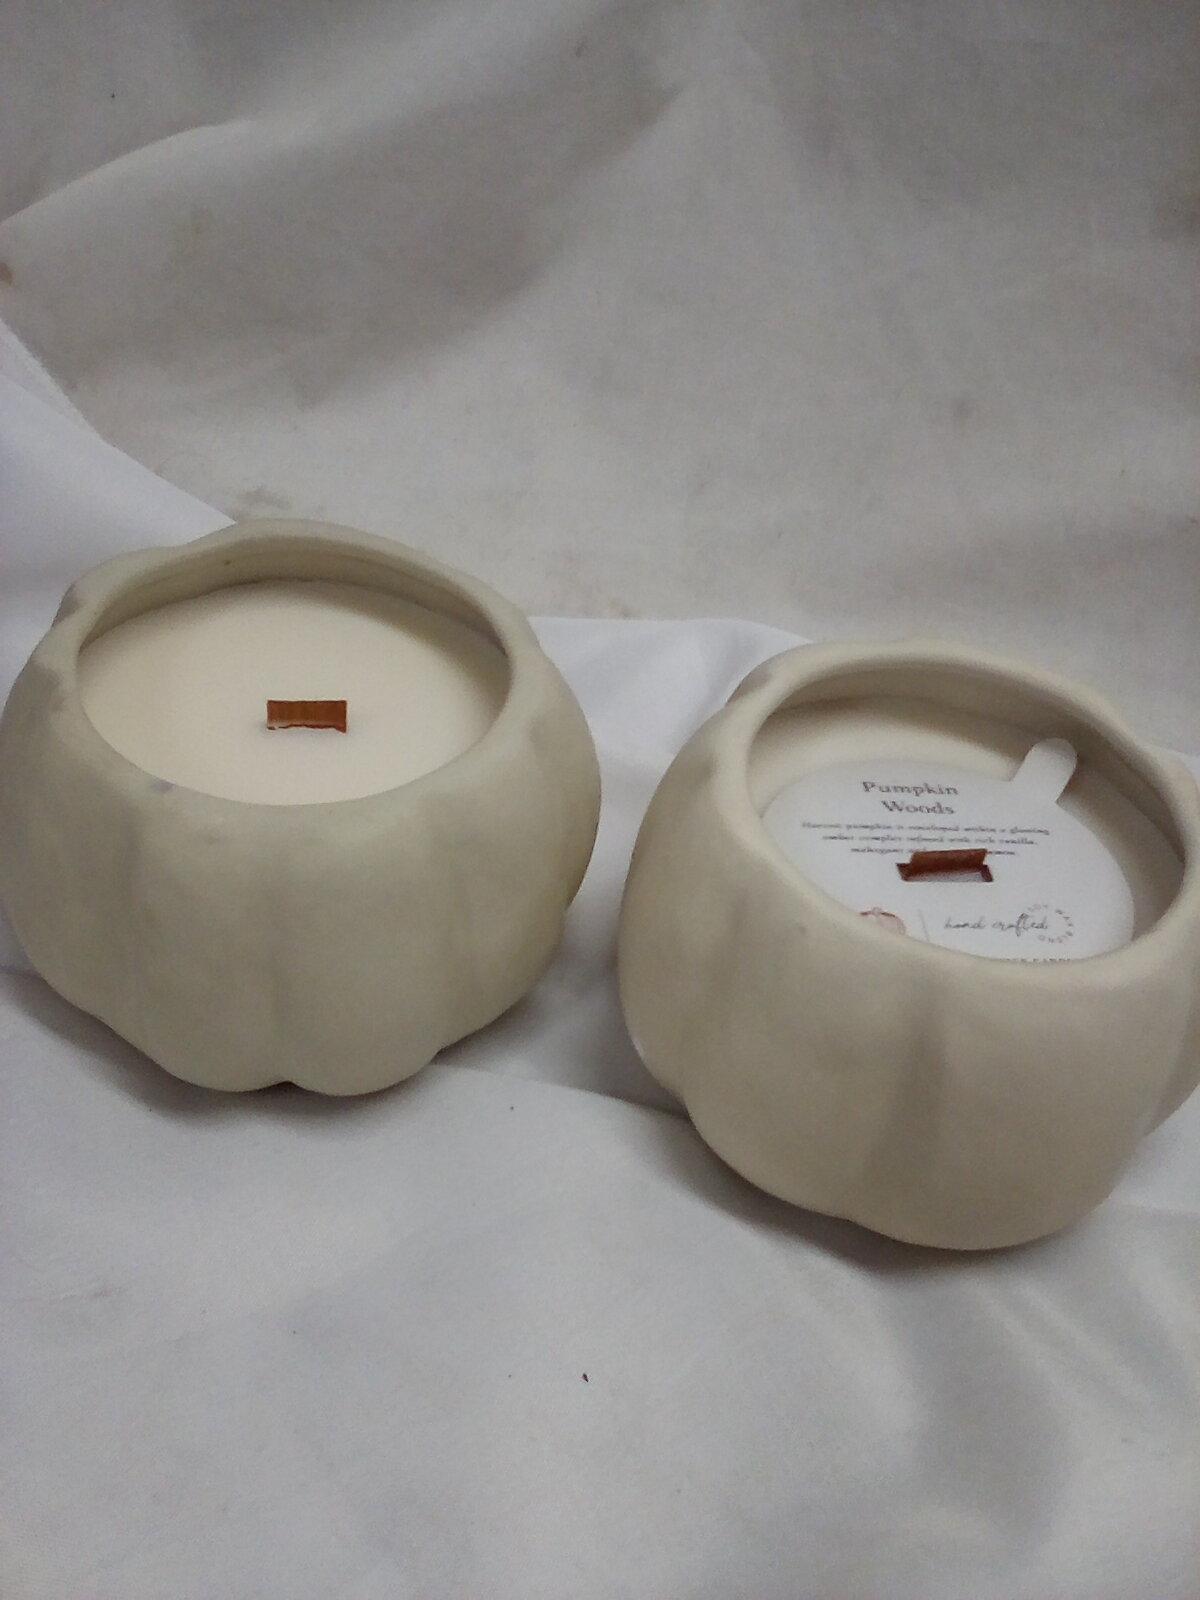 QTY 2 Pumpkin Woods crackling wooden wick candle MSRP: 15.00 each